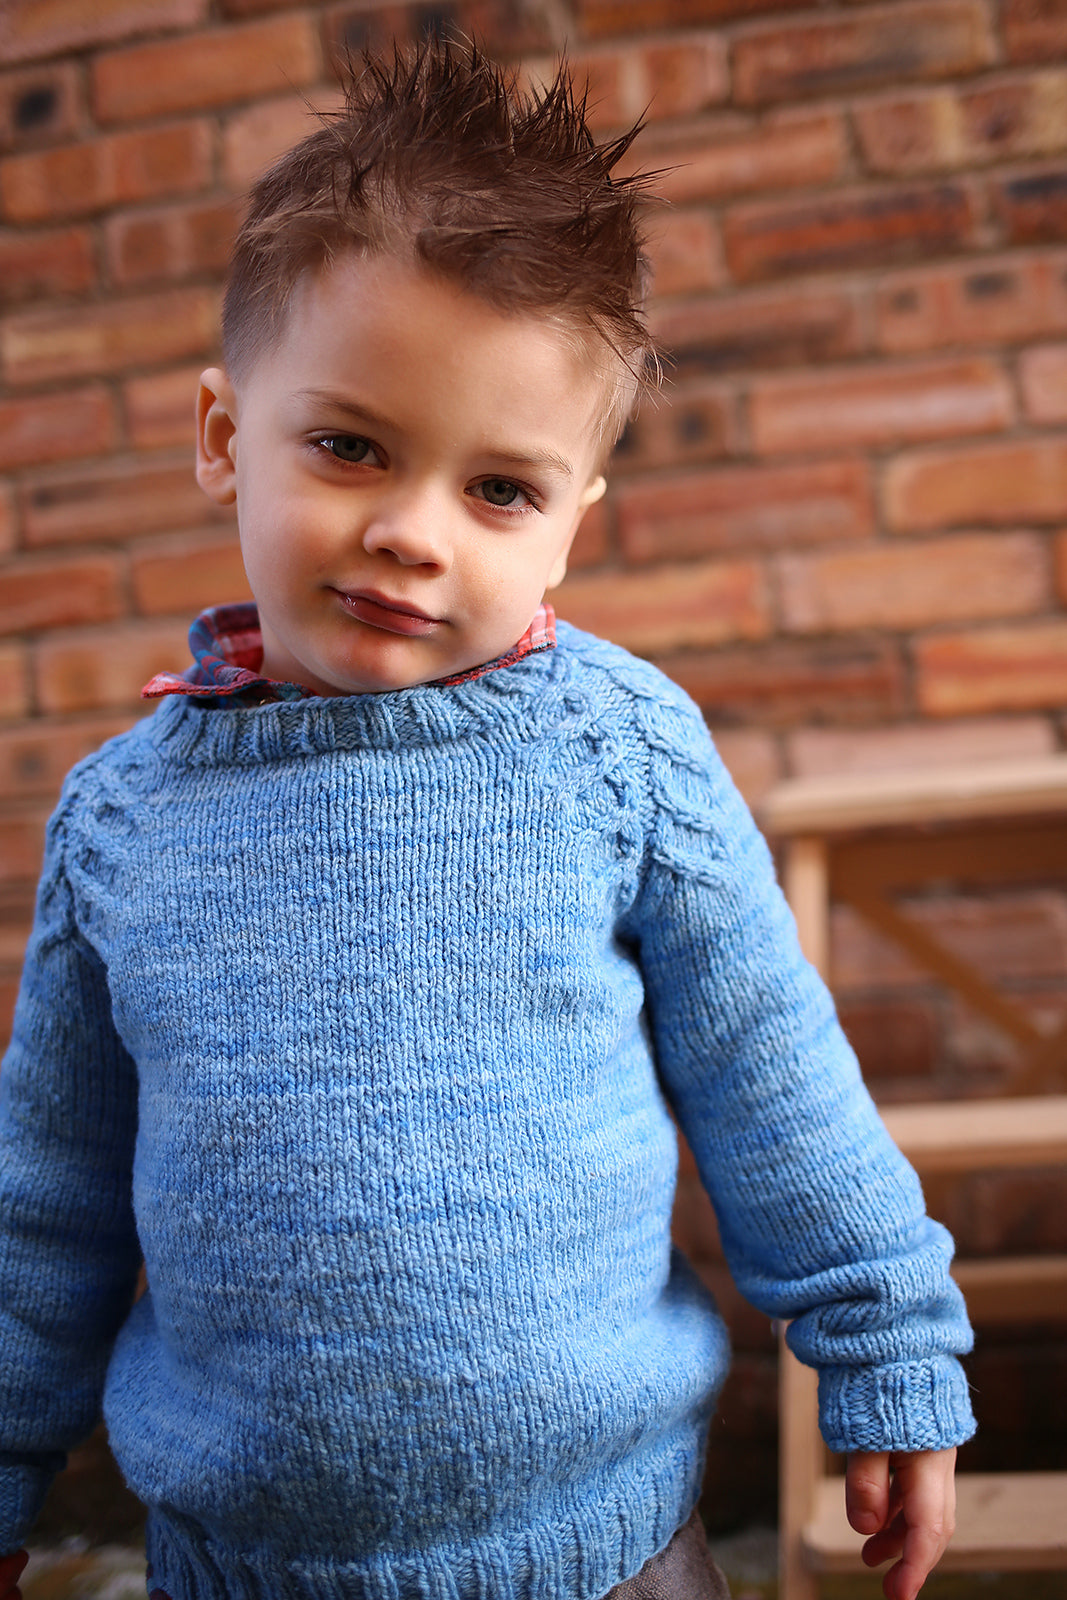 Hearthstone sweater knitting pattern by Ysolda Teague (child and adult sizes)